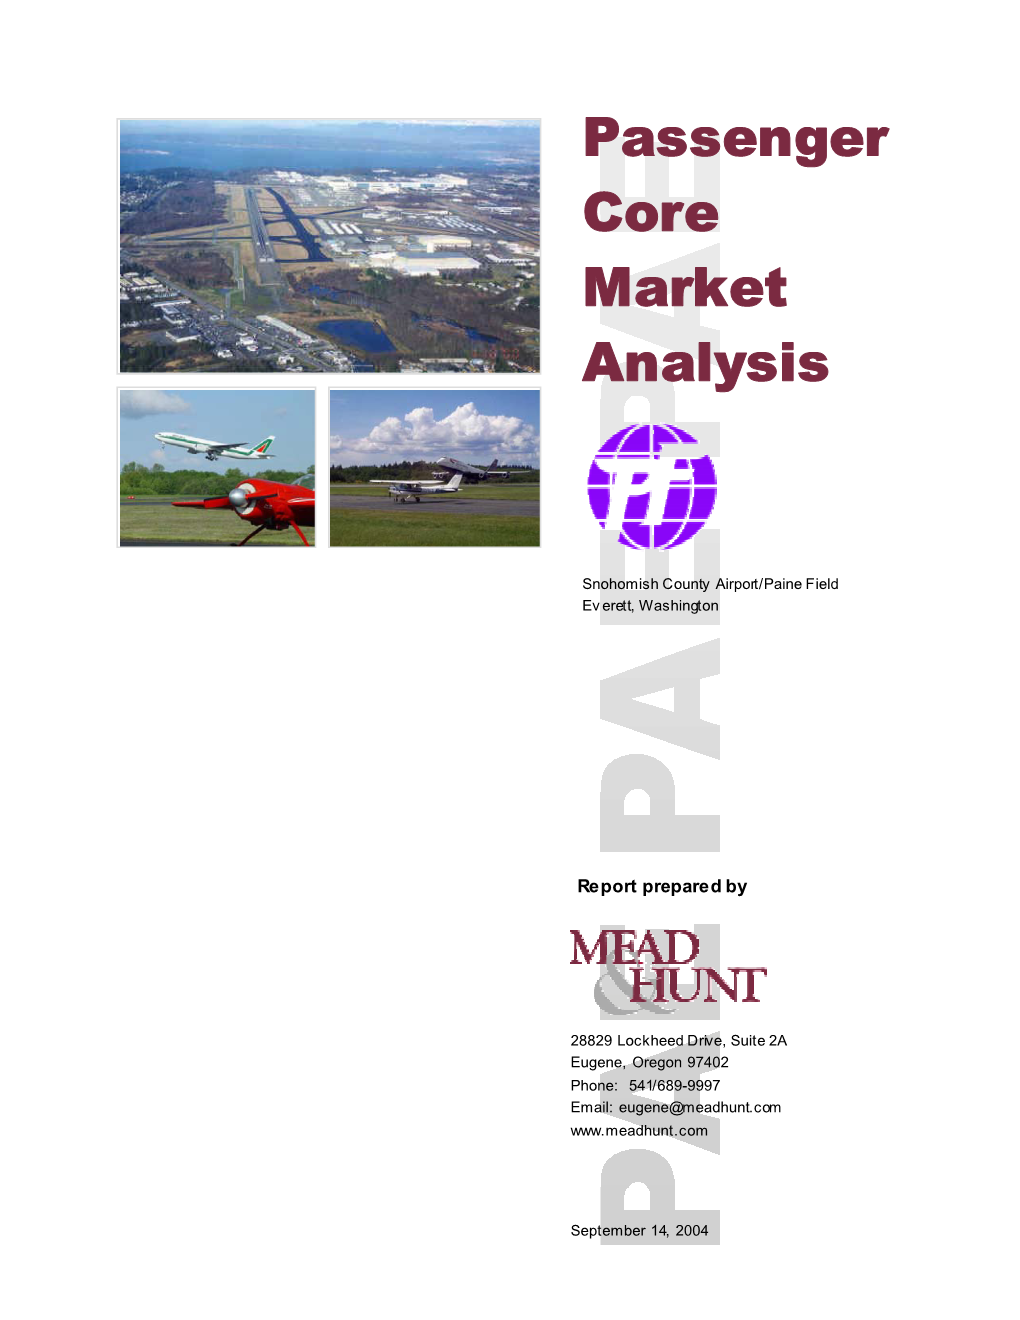 Passenger Core Market Analysis Provides Objective Information on Air Travel in the Region That Cannot Be Accessed from Other Sources